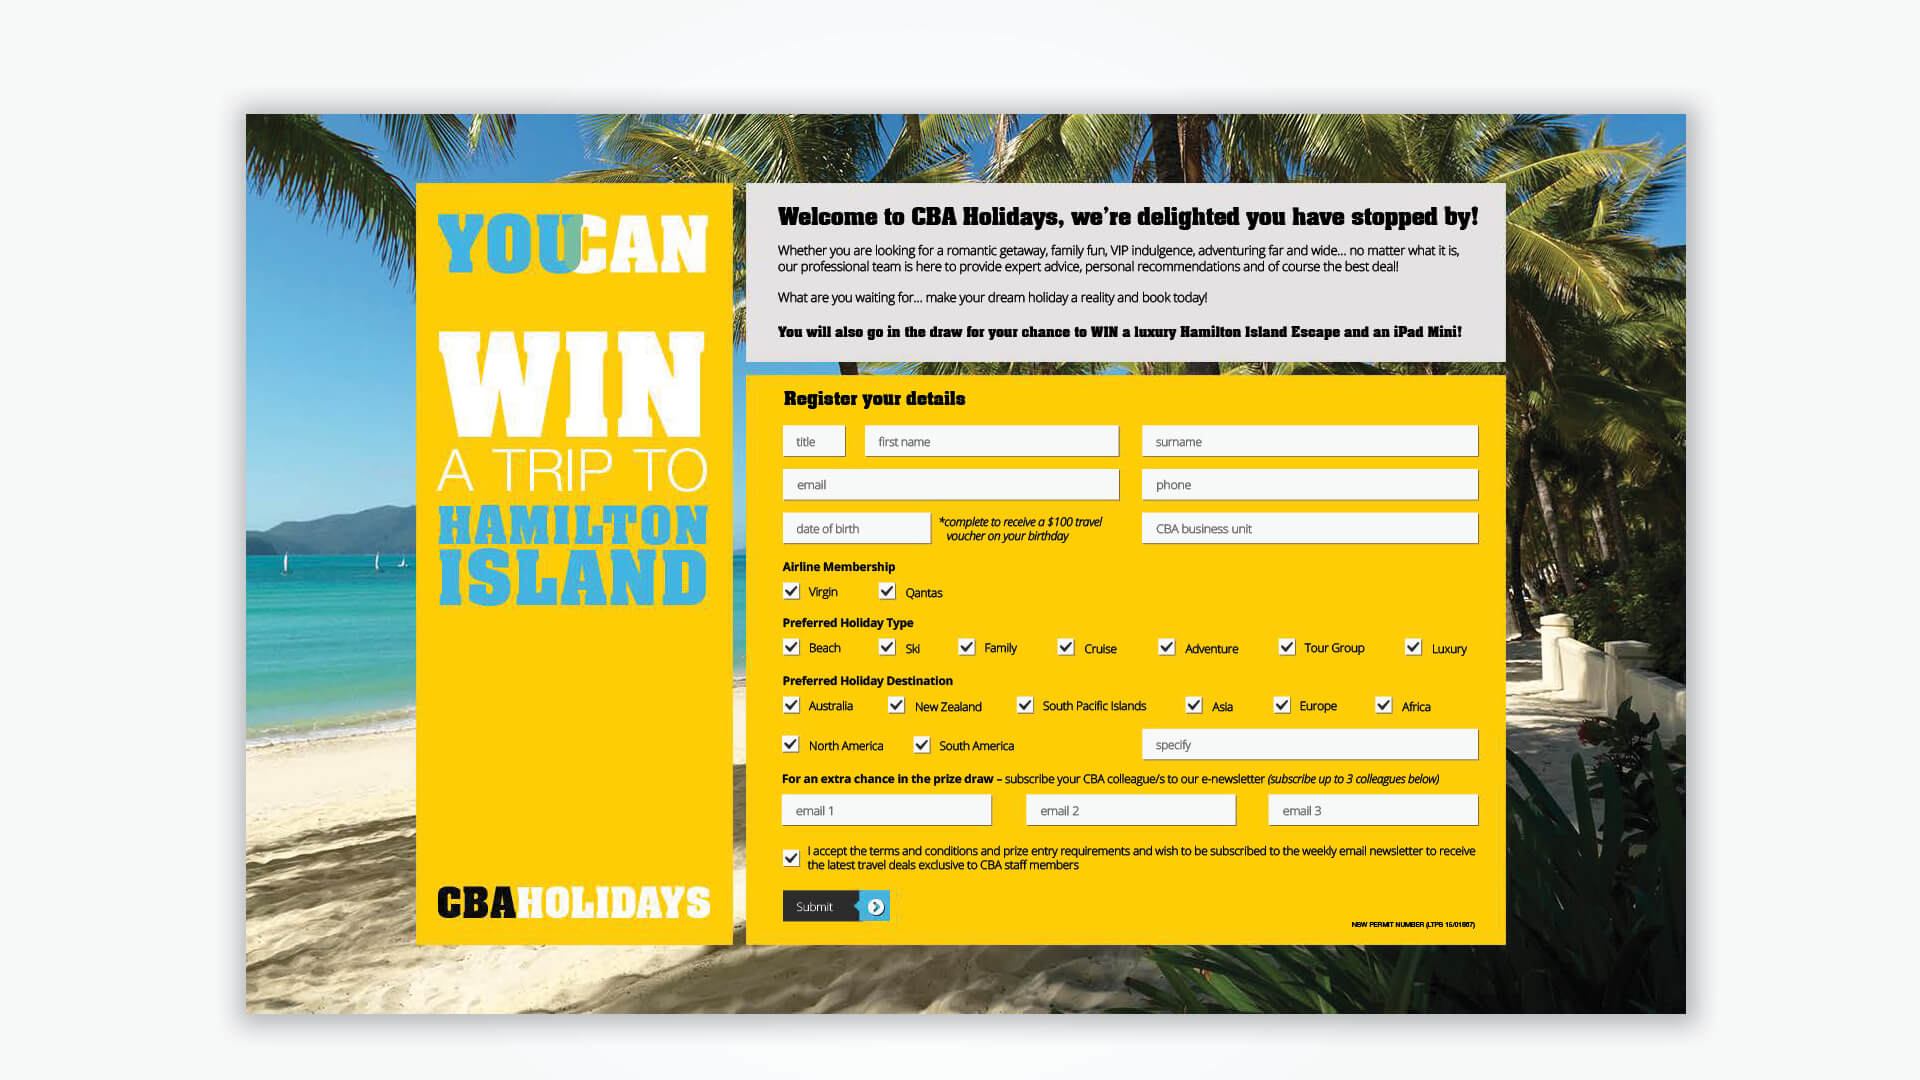 CommBank Holidays Microsite launch by Think Creative Agency